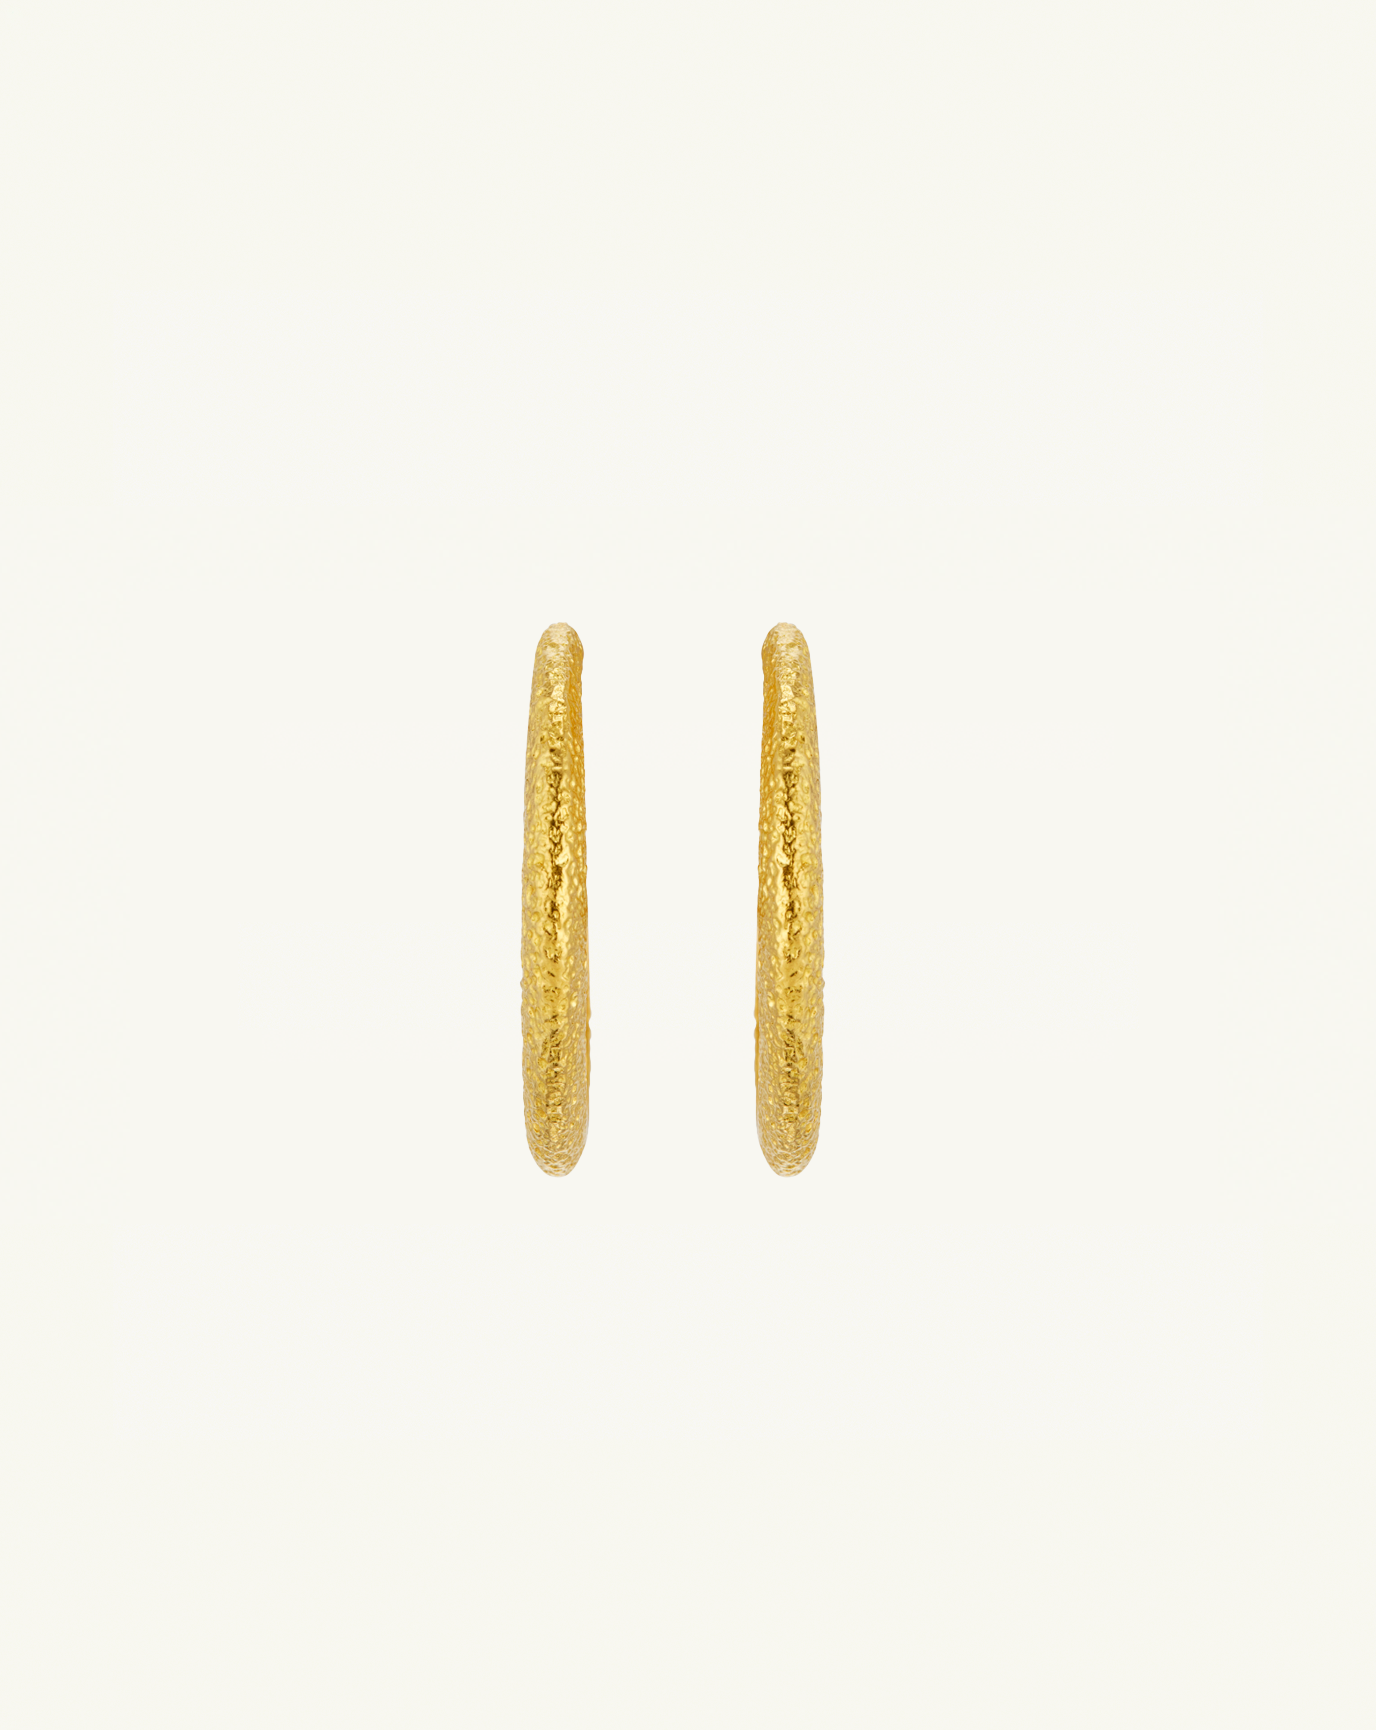 Straight on product image of the large asymmetric hoops with textured gold 